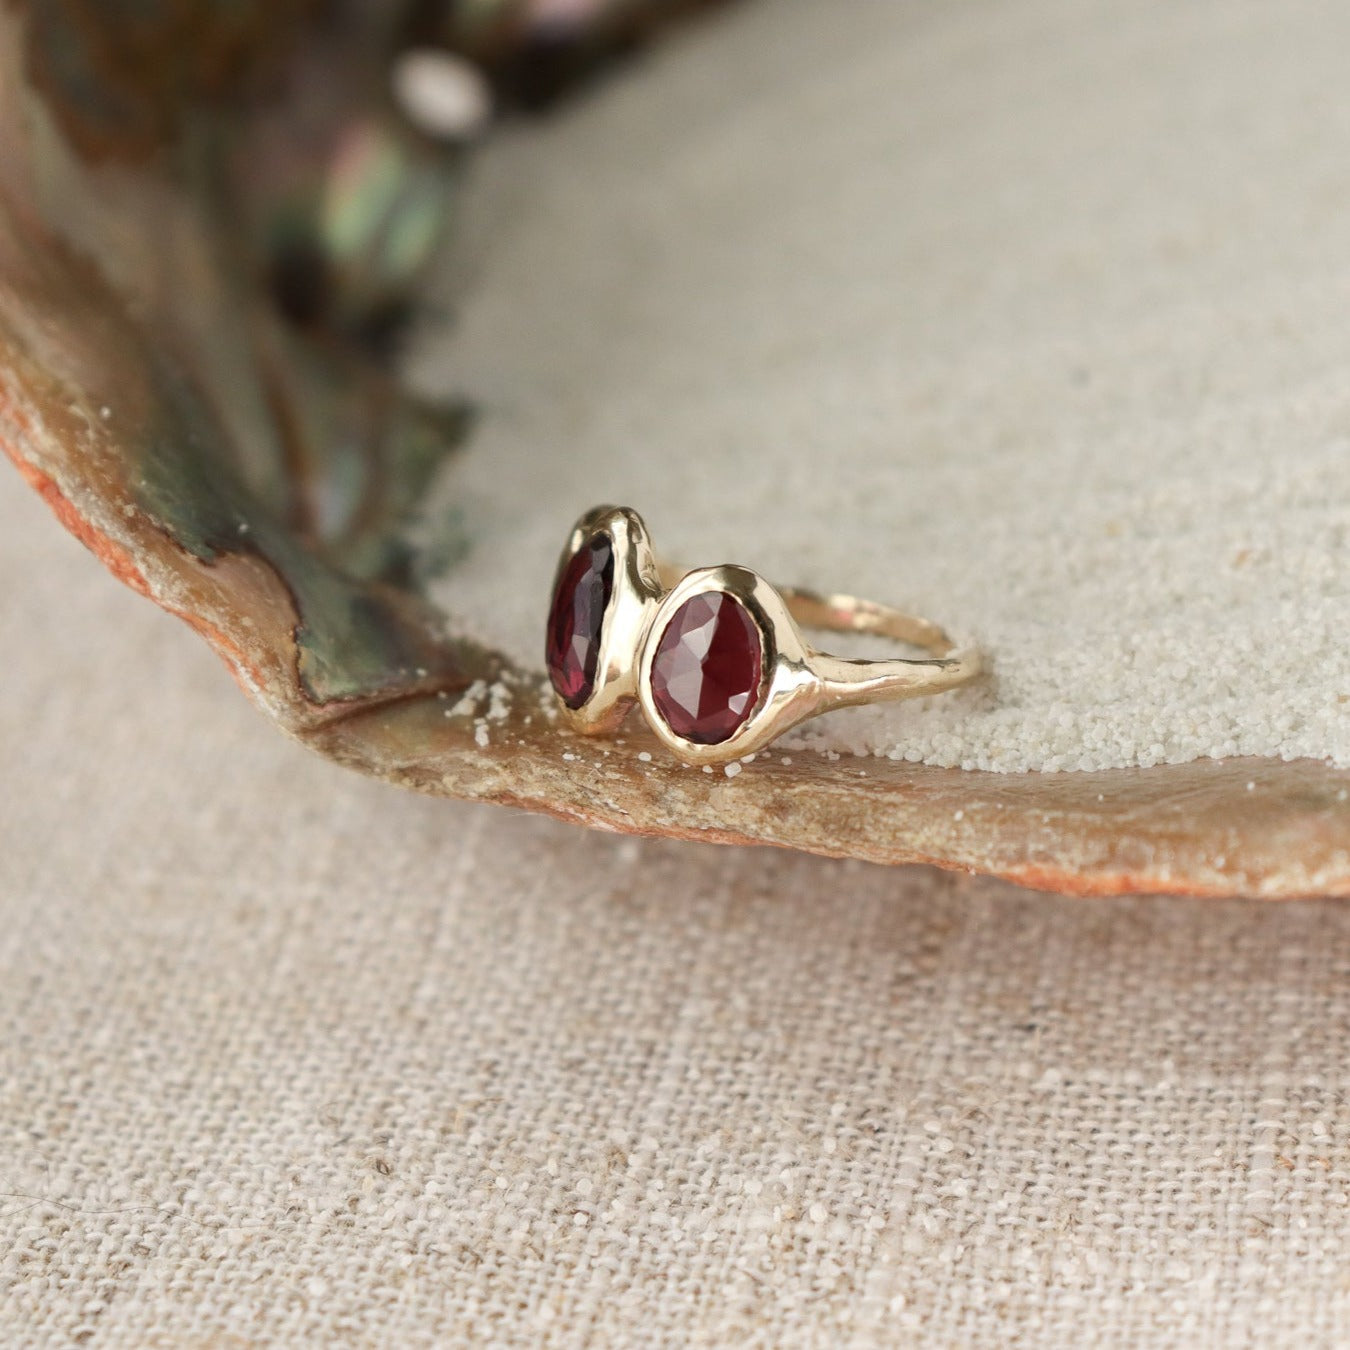 Three rose cut rhodolite garnets are bezel set  on an organically crafted 14k gold band.